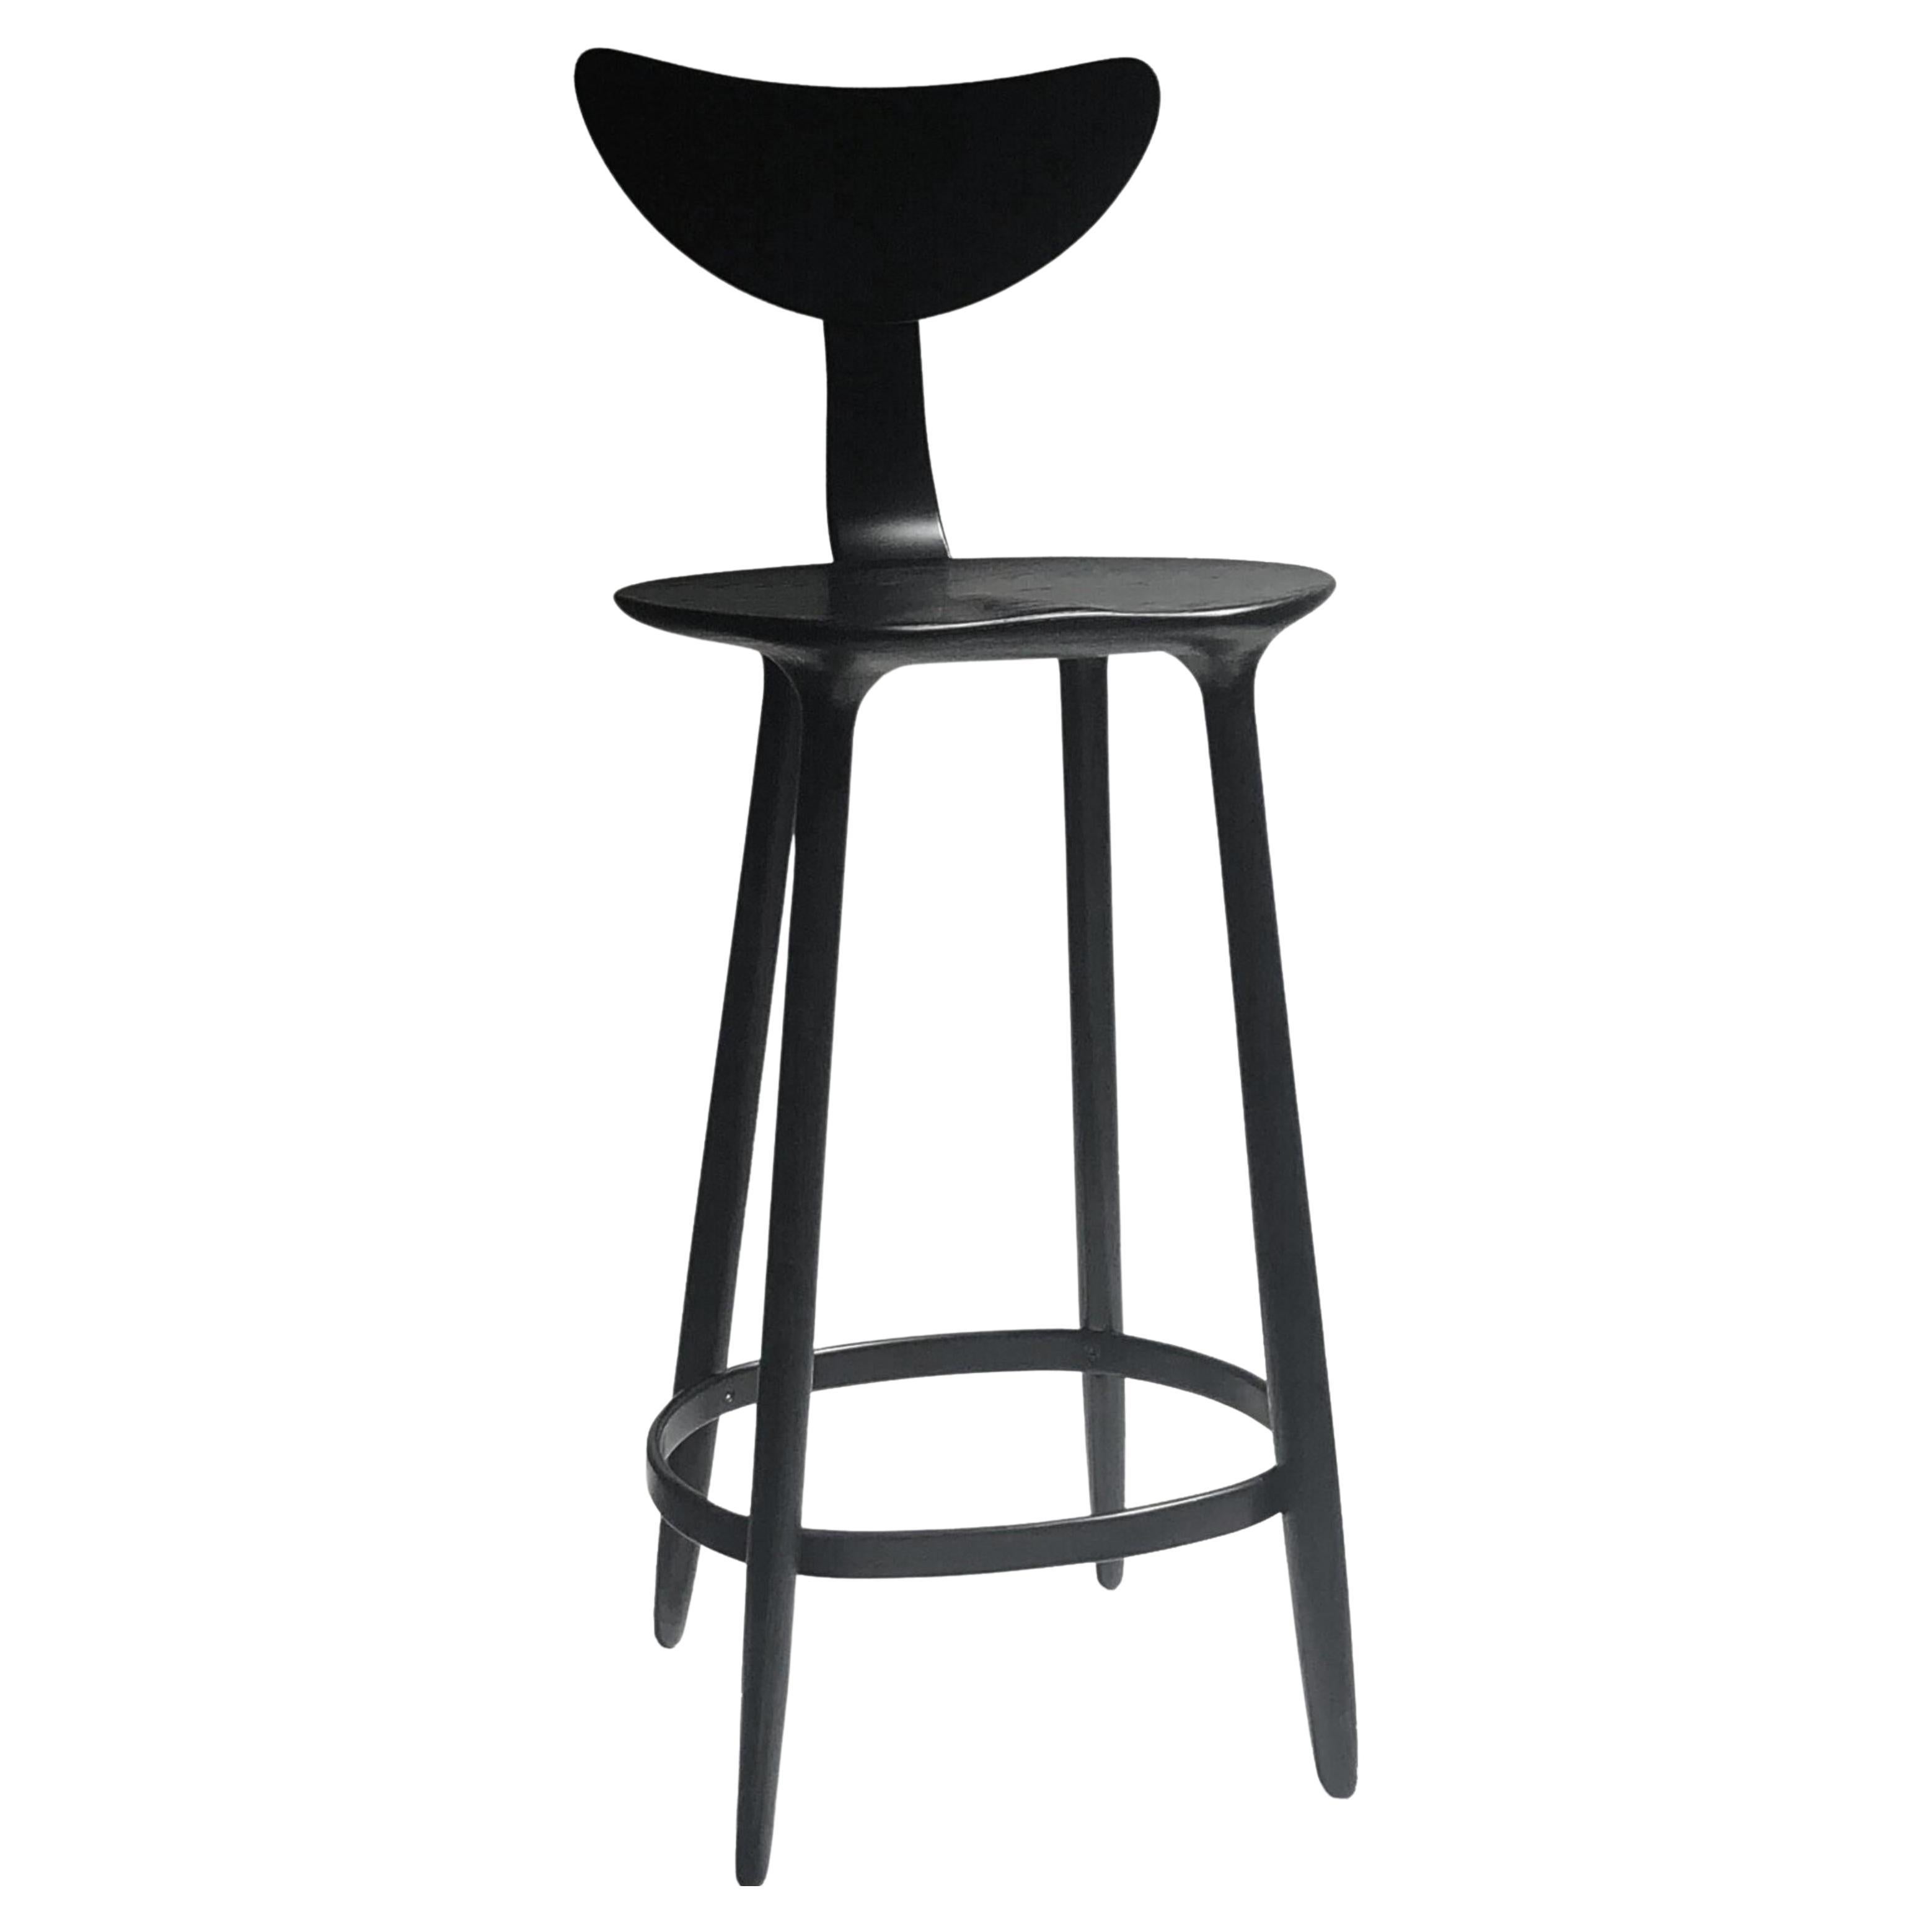 Black Stained Ash Daiku Bar Chair by Victoria Magniant For Sale